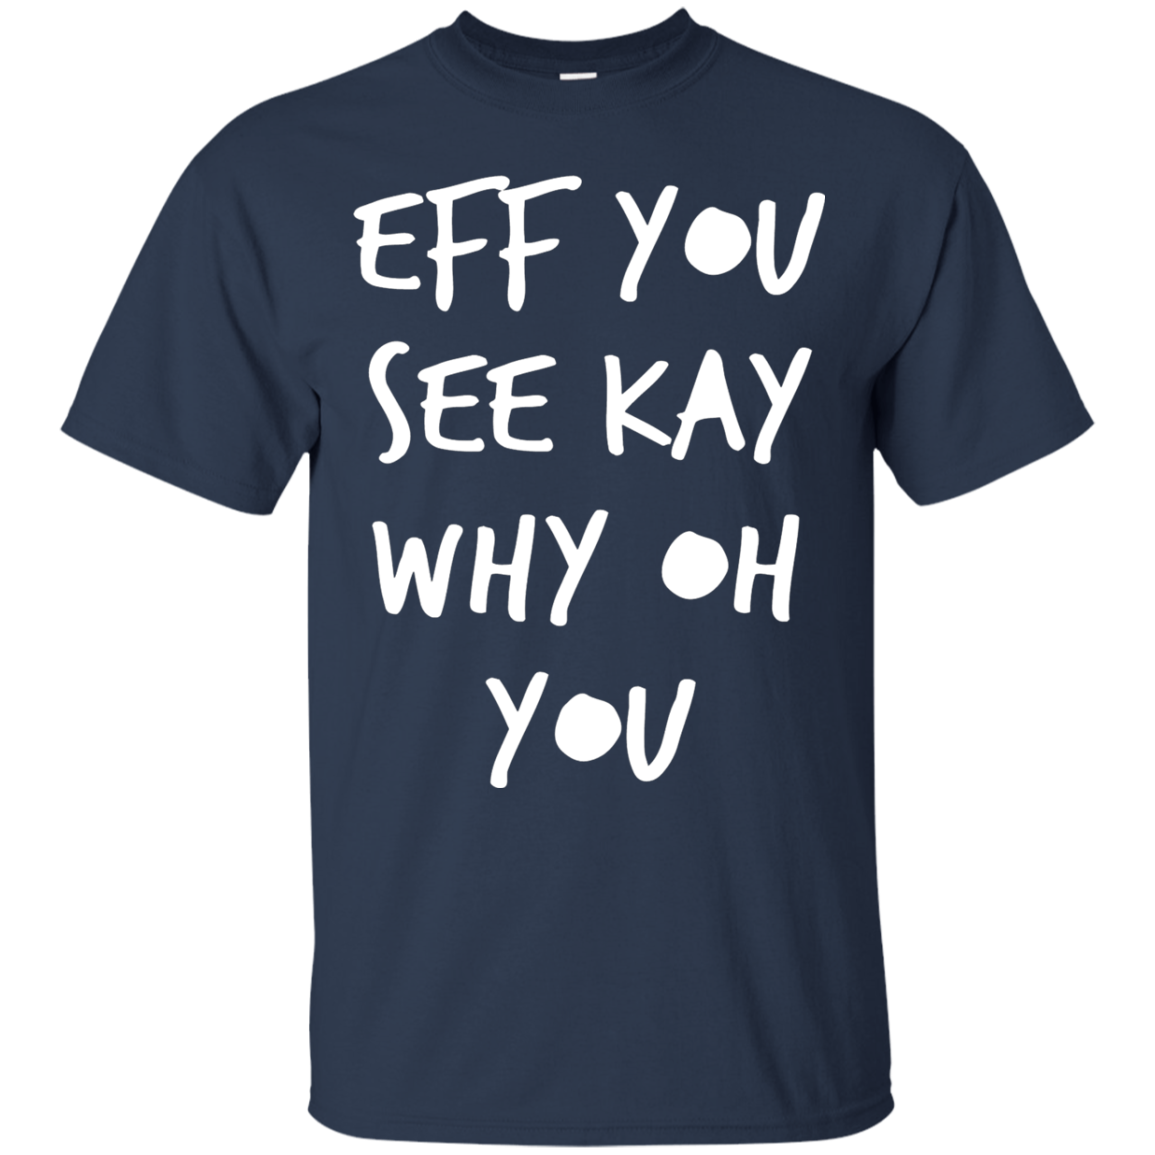 Eff You See Kay Why Oh You Shirt, Hoodie | Allbluetees.com